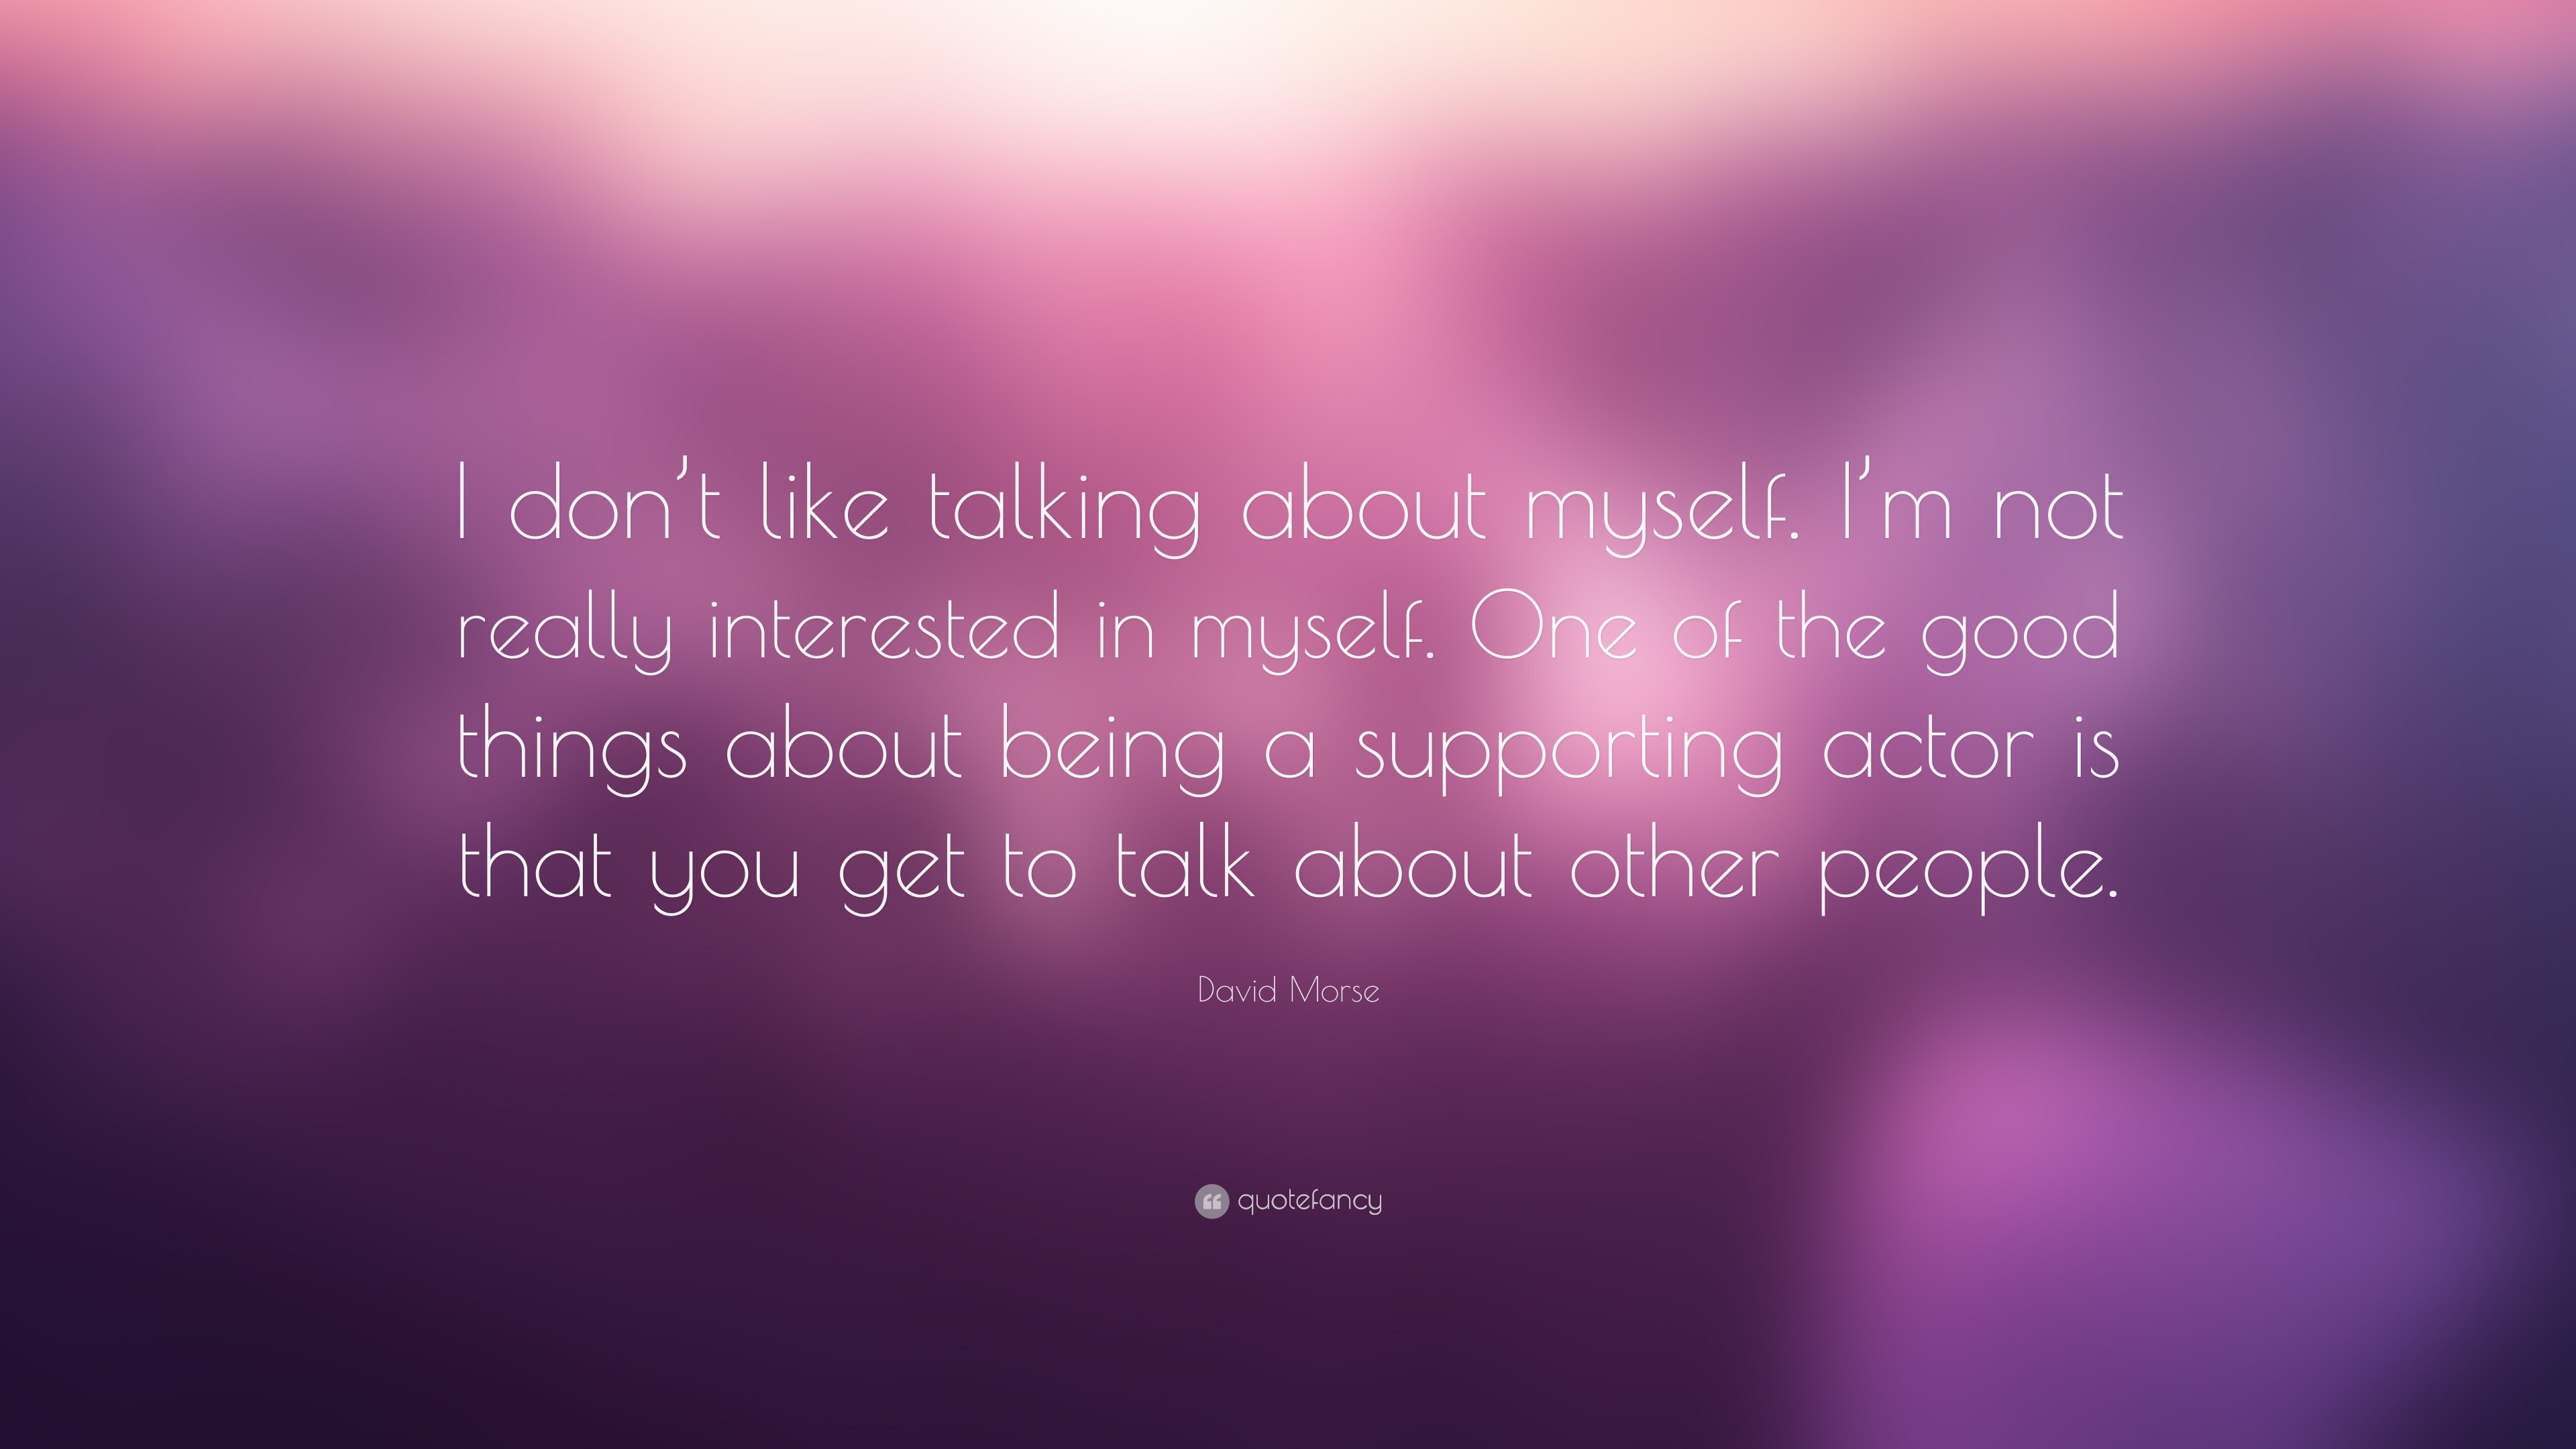 David Morse Quote: “I don’t like talking about myself. I’m not really ...